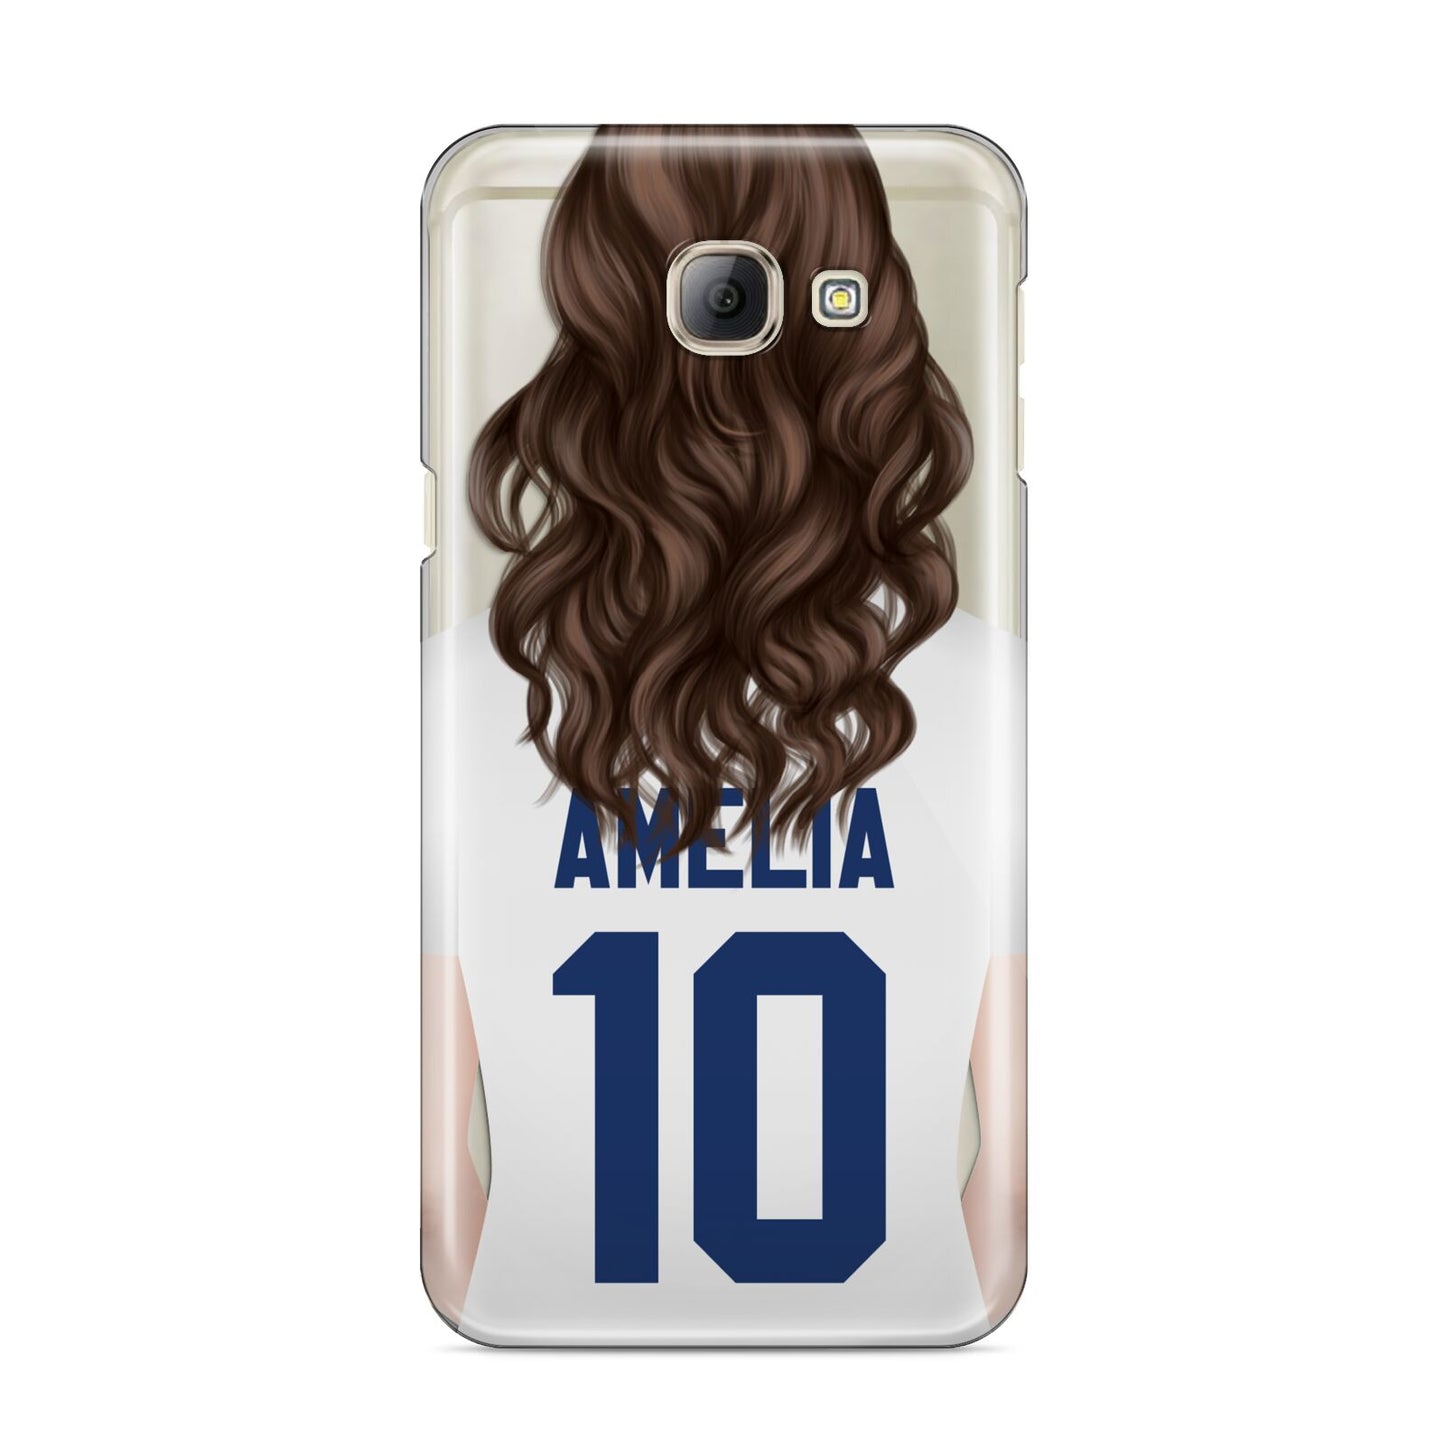 Womens Footballer Personalised Samsung Galaxy A8 2016 Case